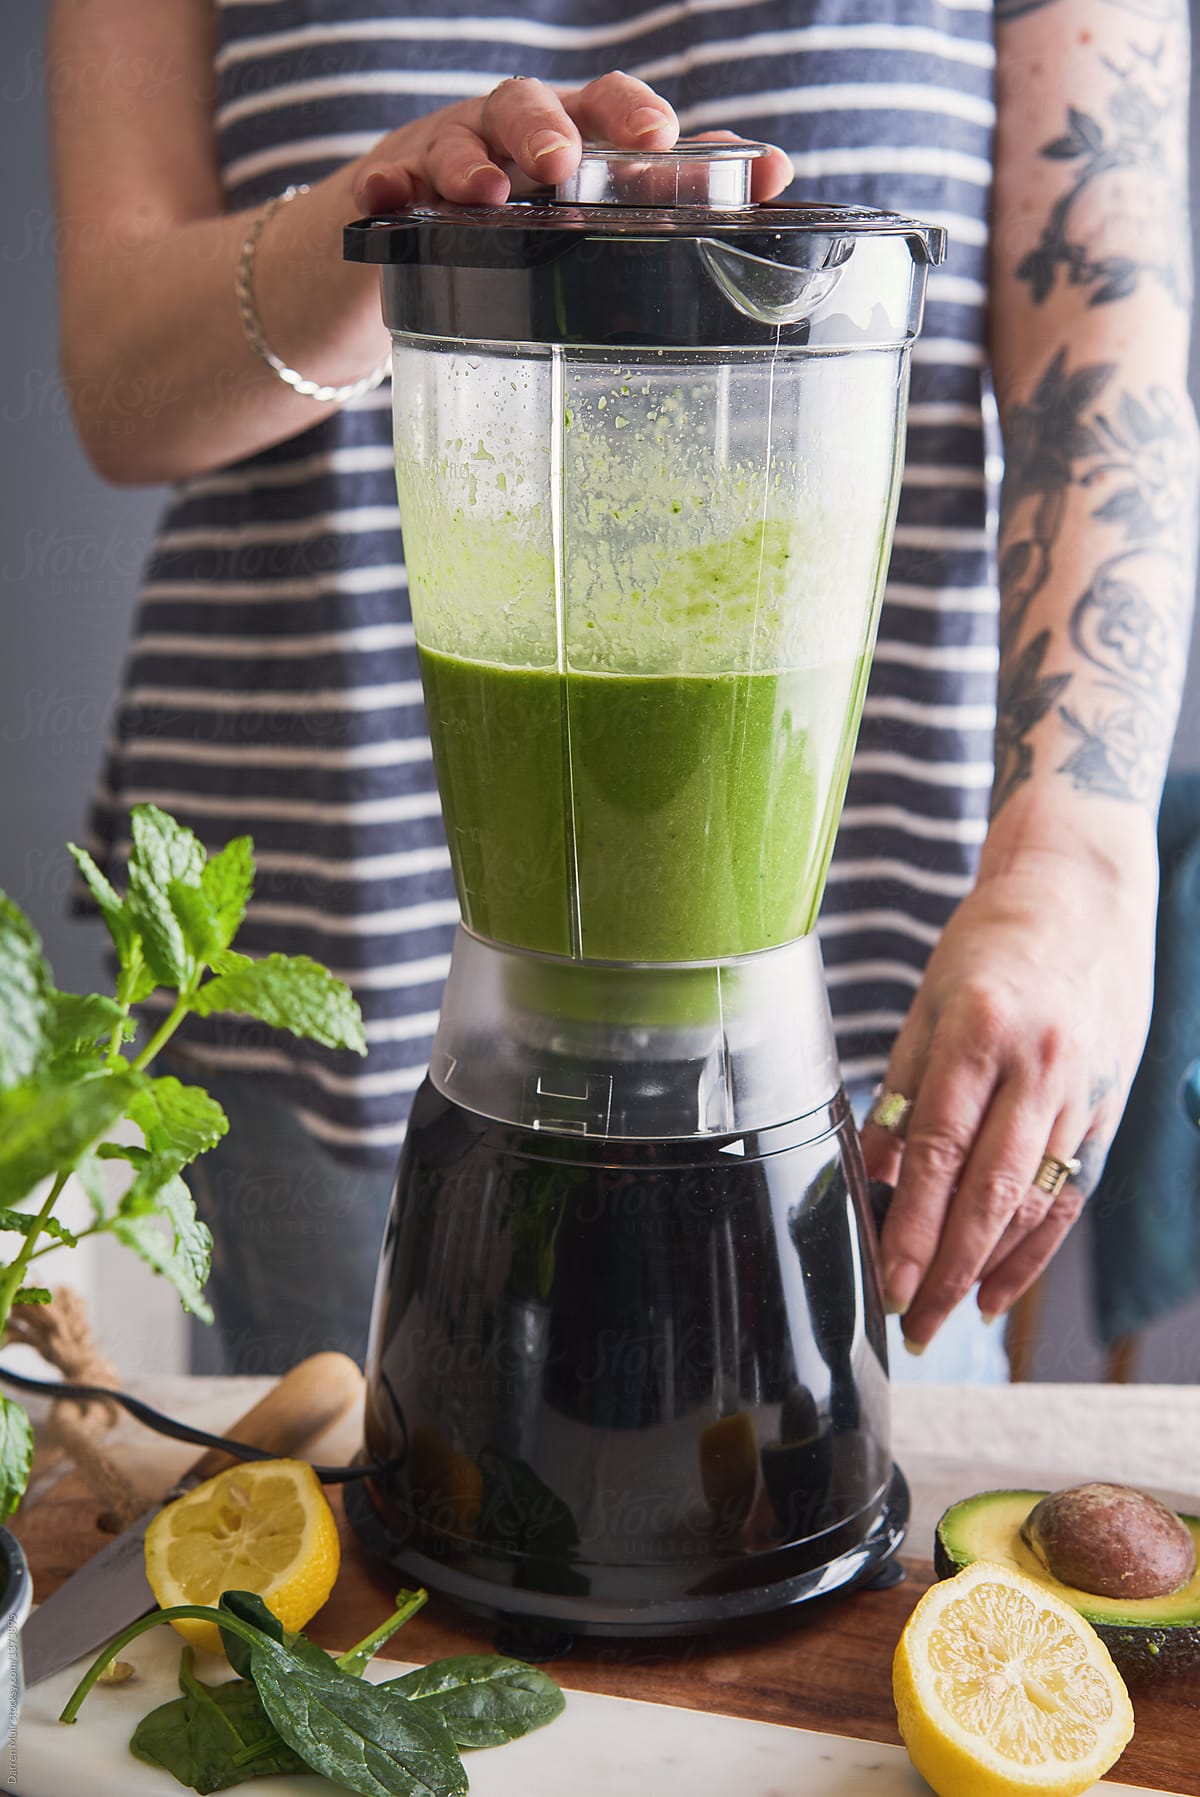 Woman with tattoos preparing a healthy detox smoothie drink in a blender.